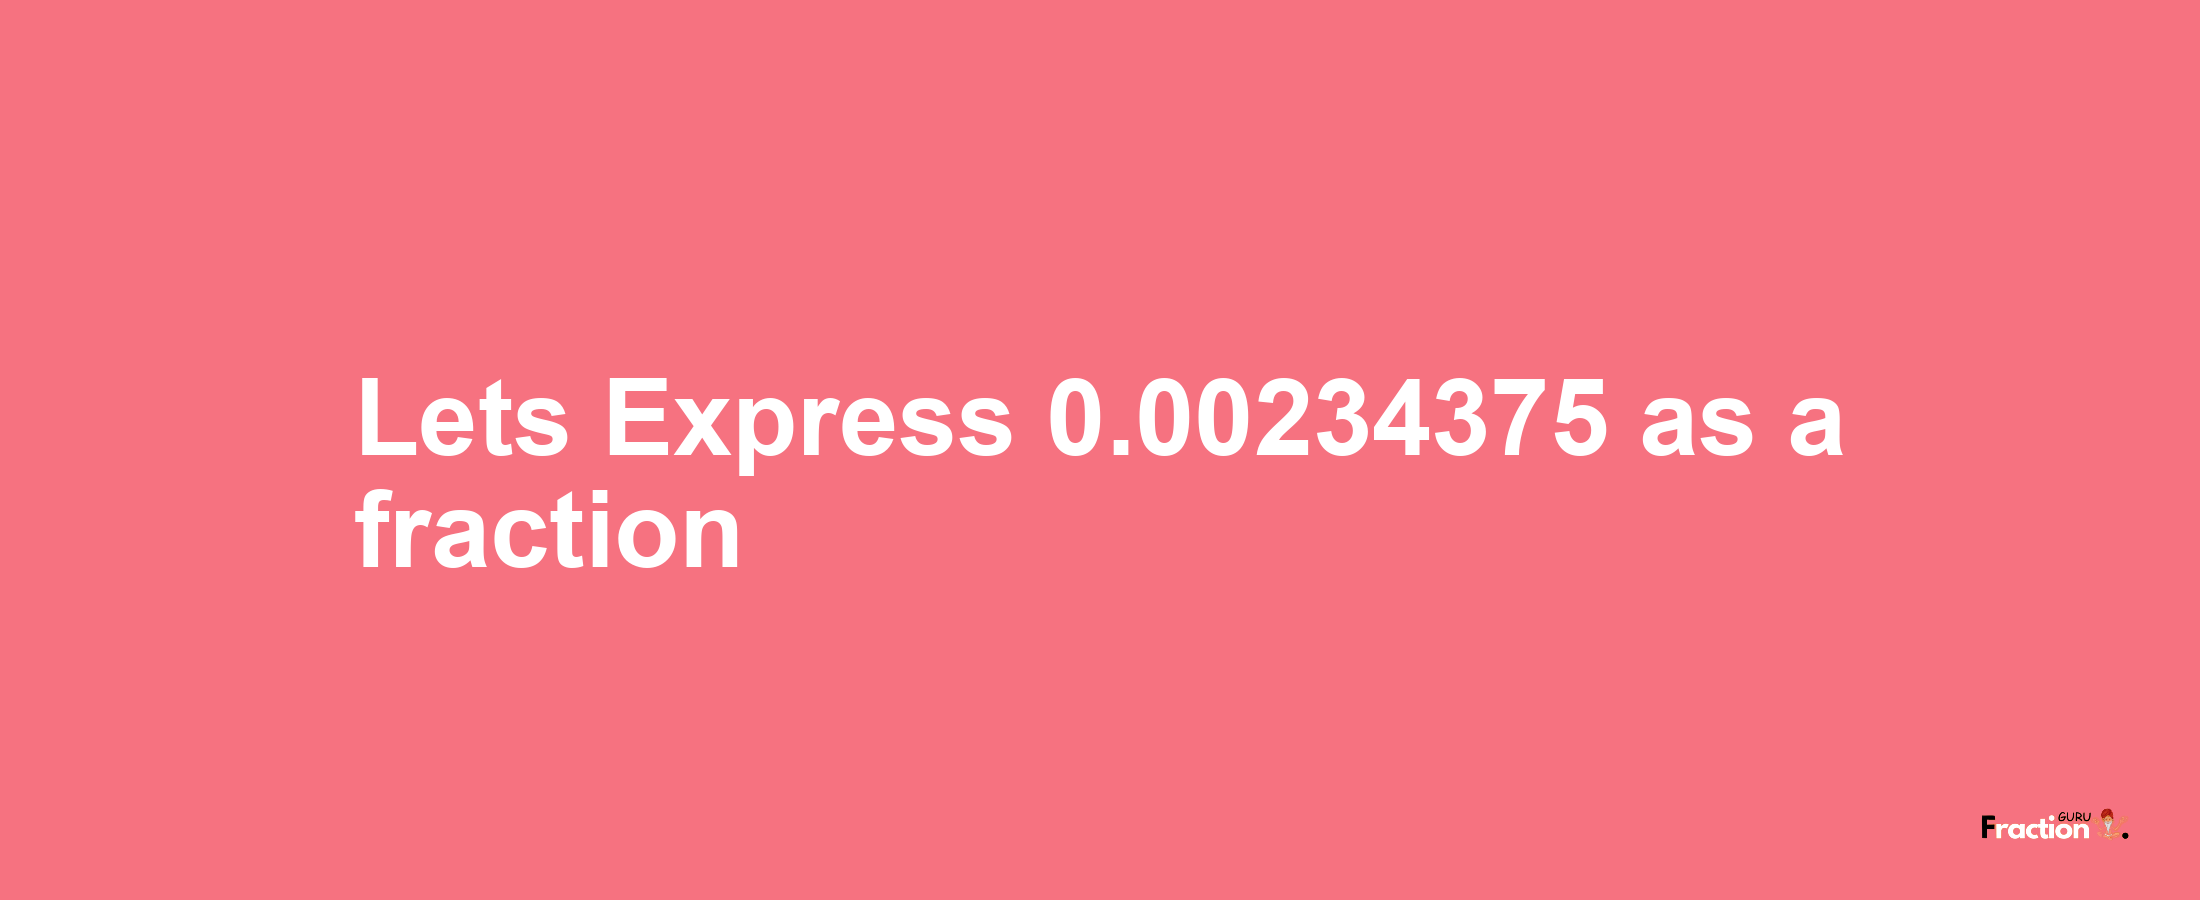 Lets Express 0.00234375 as afraction